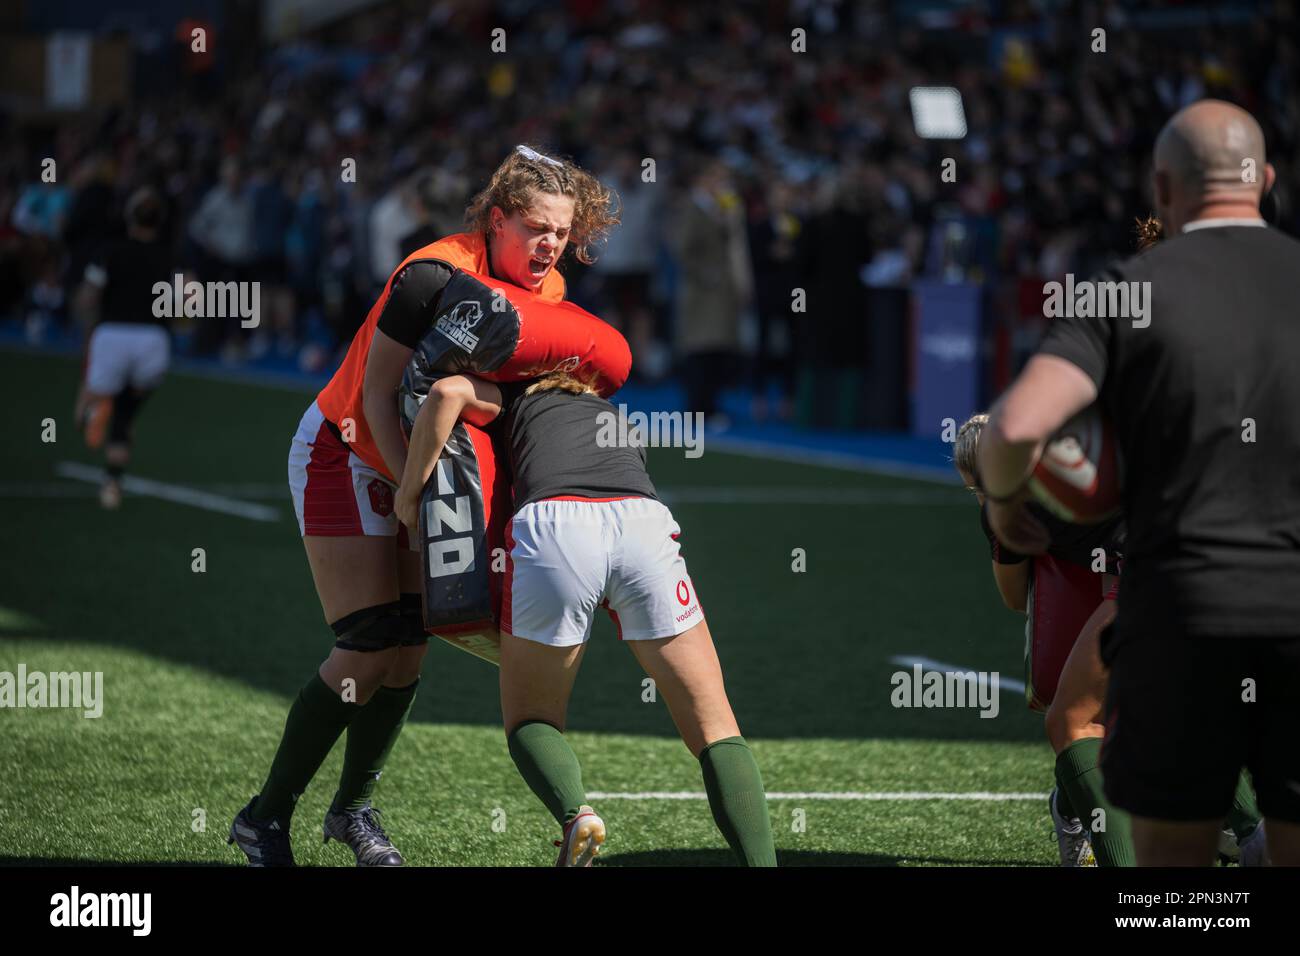 Cardiff, Wales. 15th April 2023. Warmup before the TikTok Women’s Six Nations rugby match, Wales versus England at Cardiff Park Arms Stadium in Cardiff, Wales. Credit: Sam Hardwick/Alamy Live News. Stock Photo